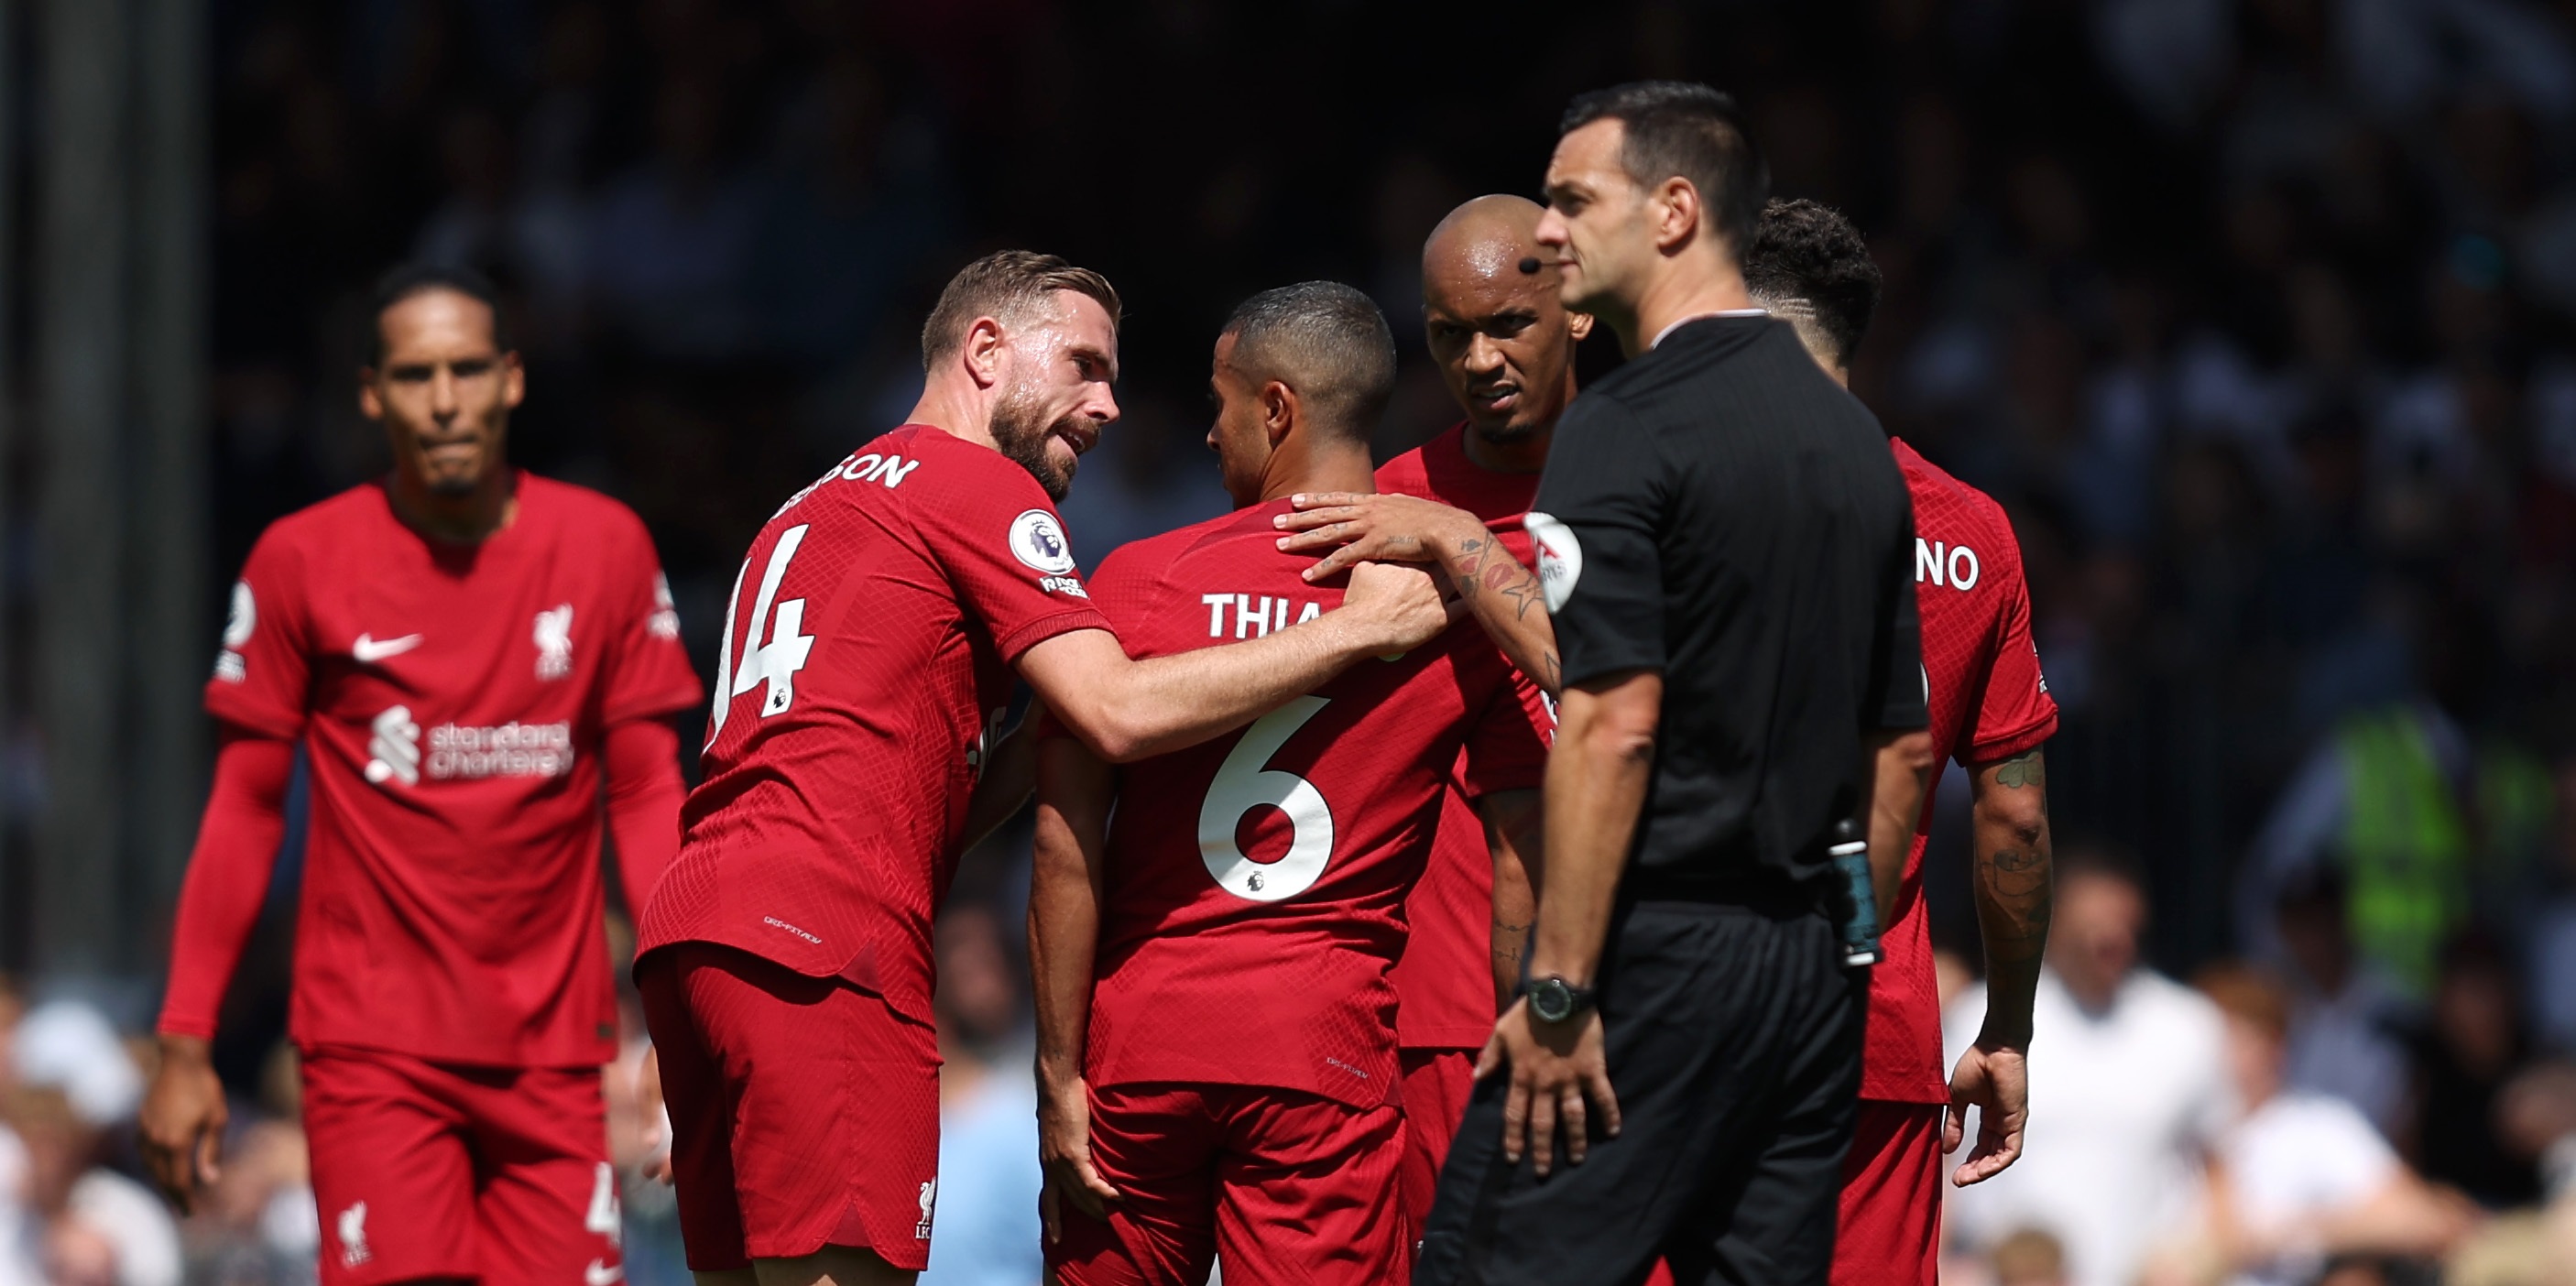 ‘The big one for me’ – Ex-PL man explains which player makes Liverpool ‘tick’ as he discusses the Reds’ slow start to the season